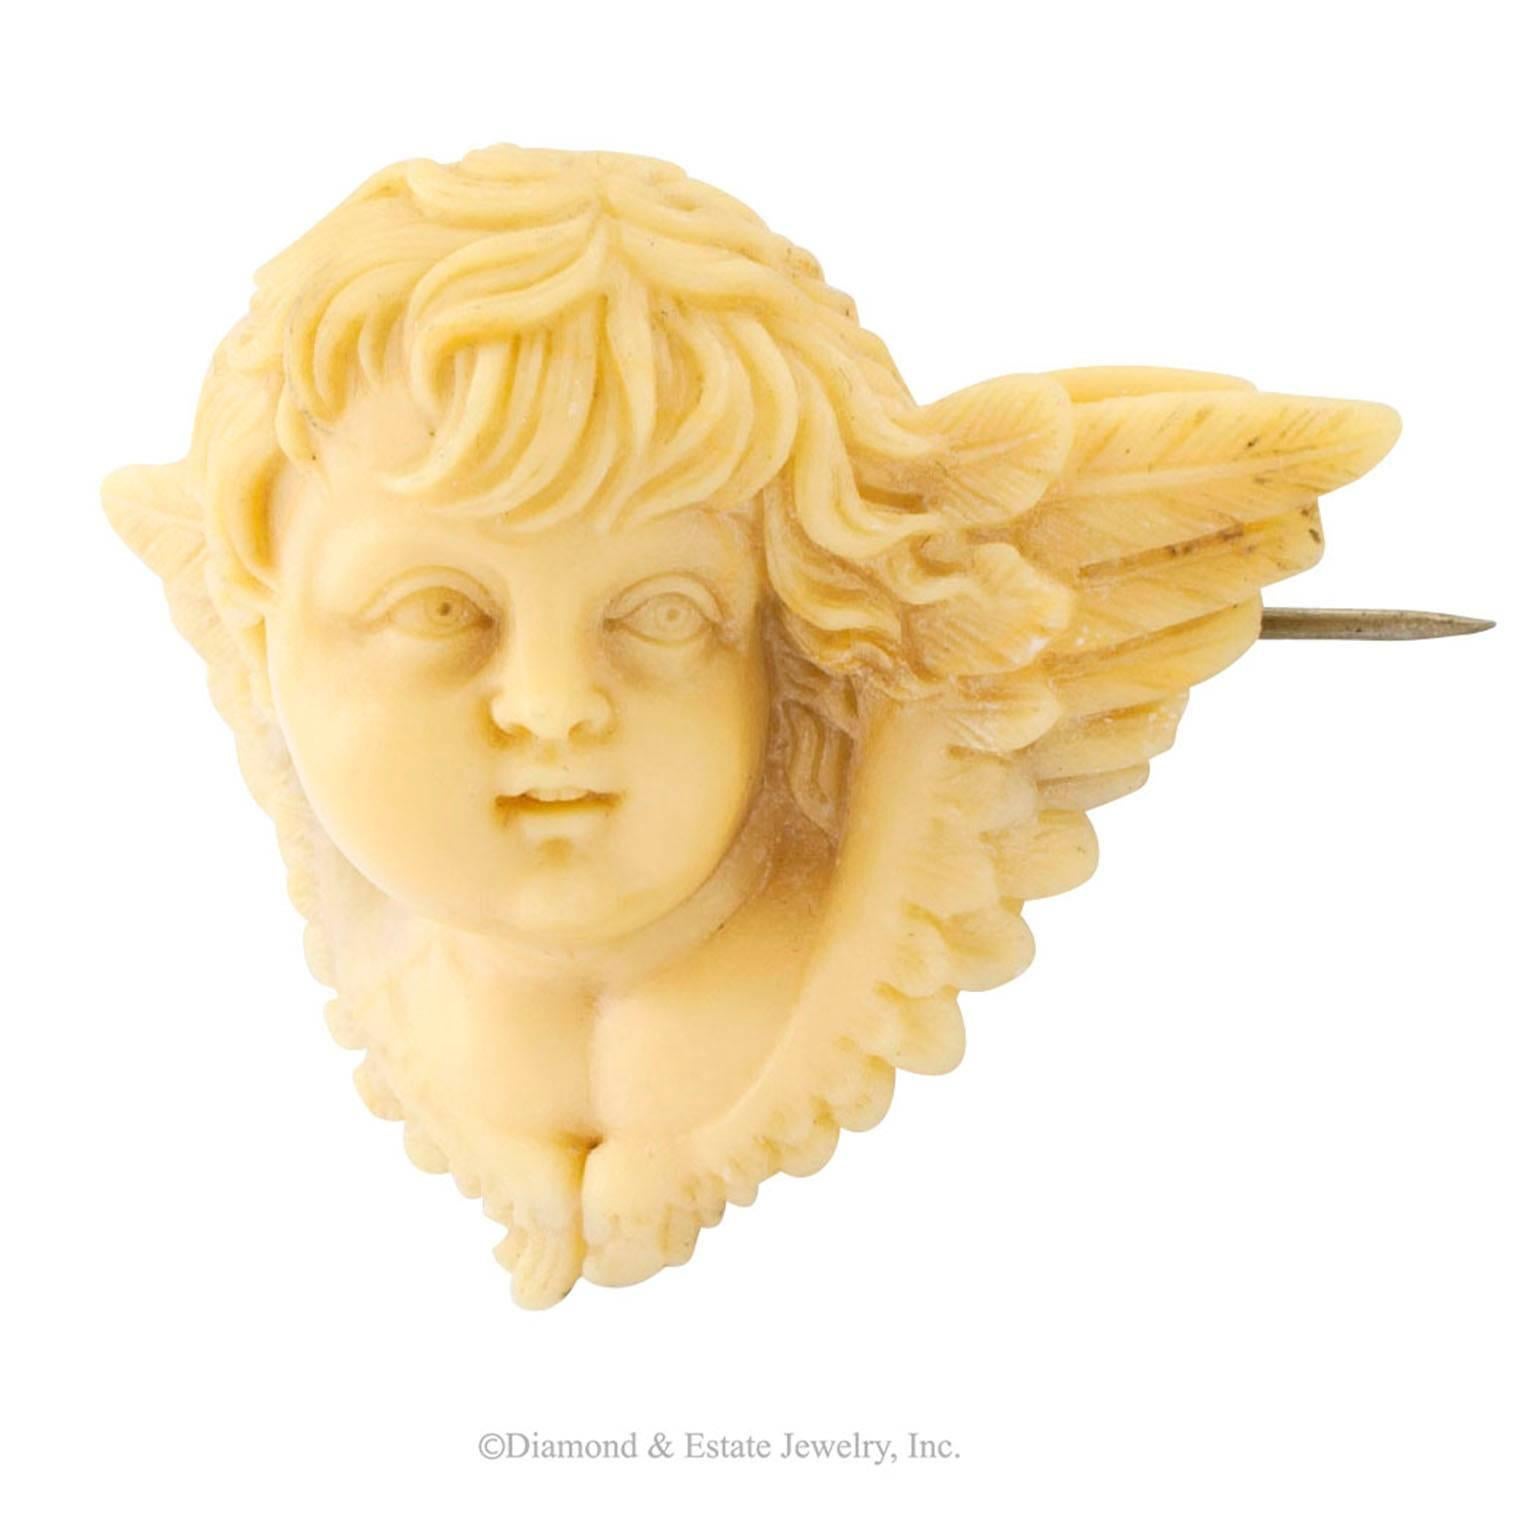 Victorian 1850s Carved Alabaster Cherub Brooch

Victorian 1850s winged cherub alabaster carved brooch.  As far as heraldic celestial beings are concerned, this one is depicted in full three dimensional scale, extracted from creamy alabaster, in the